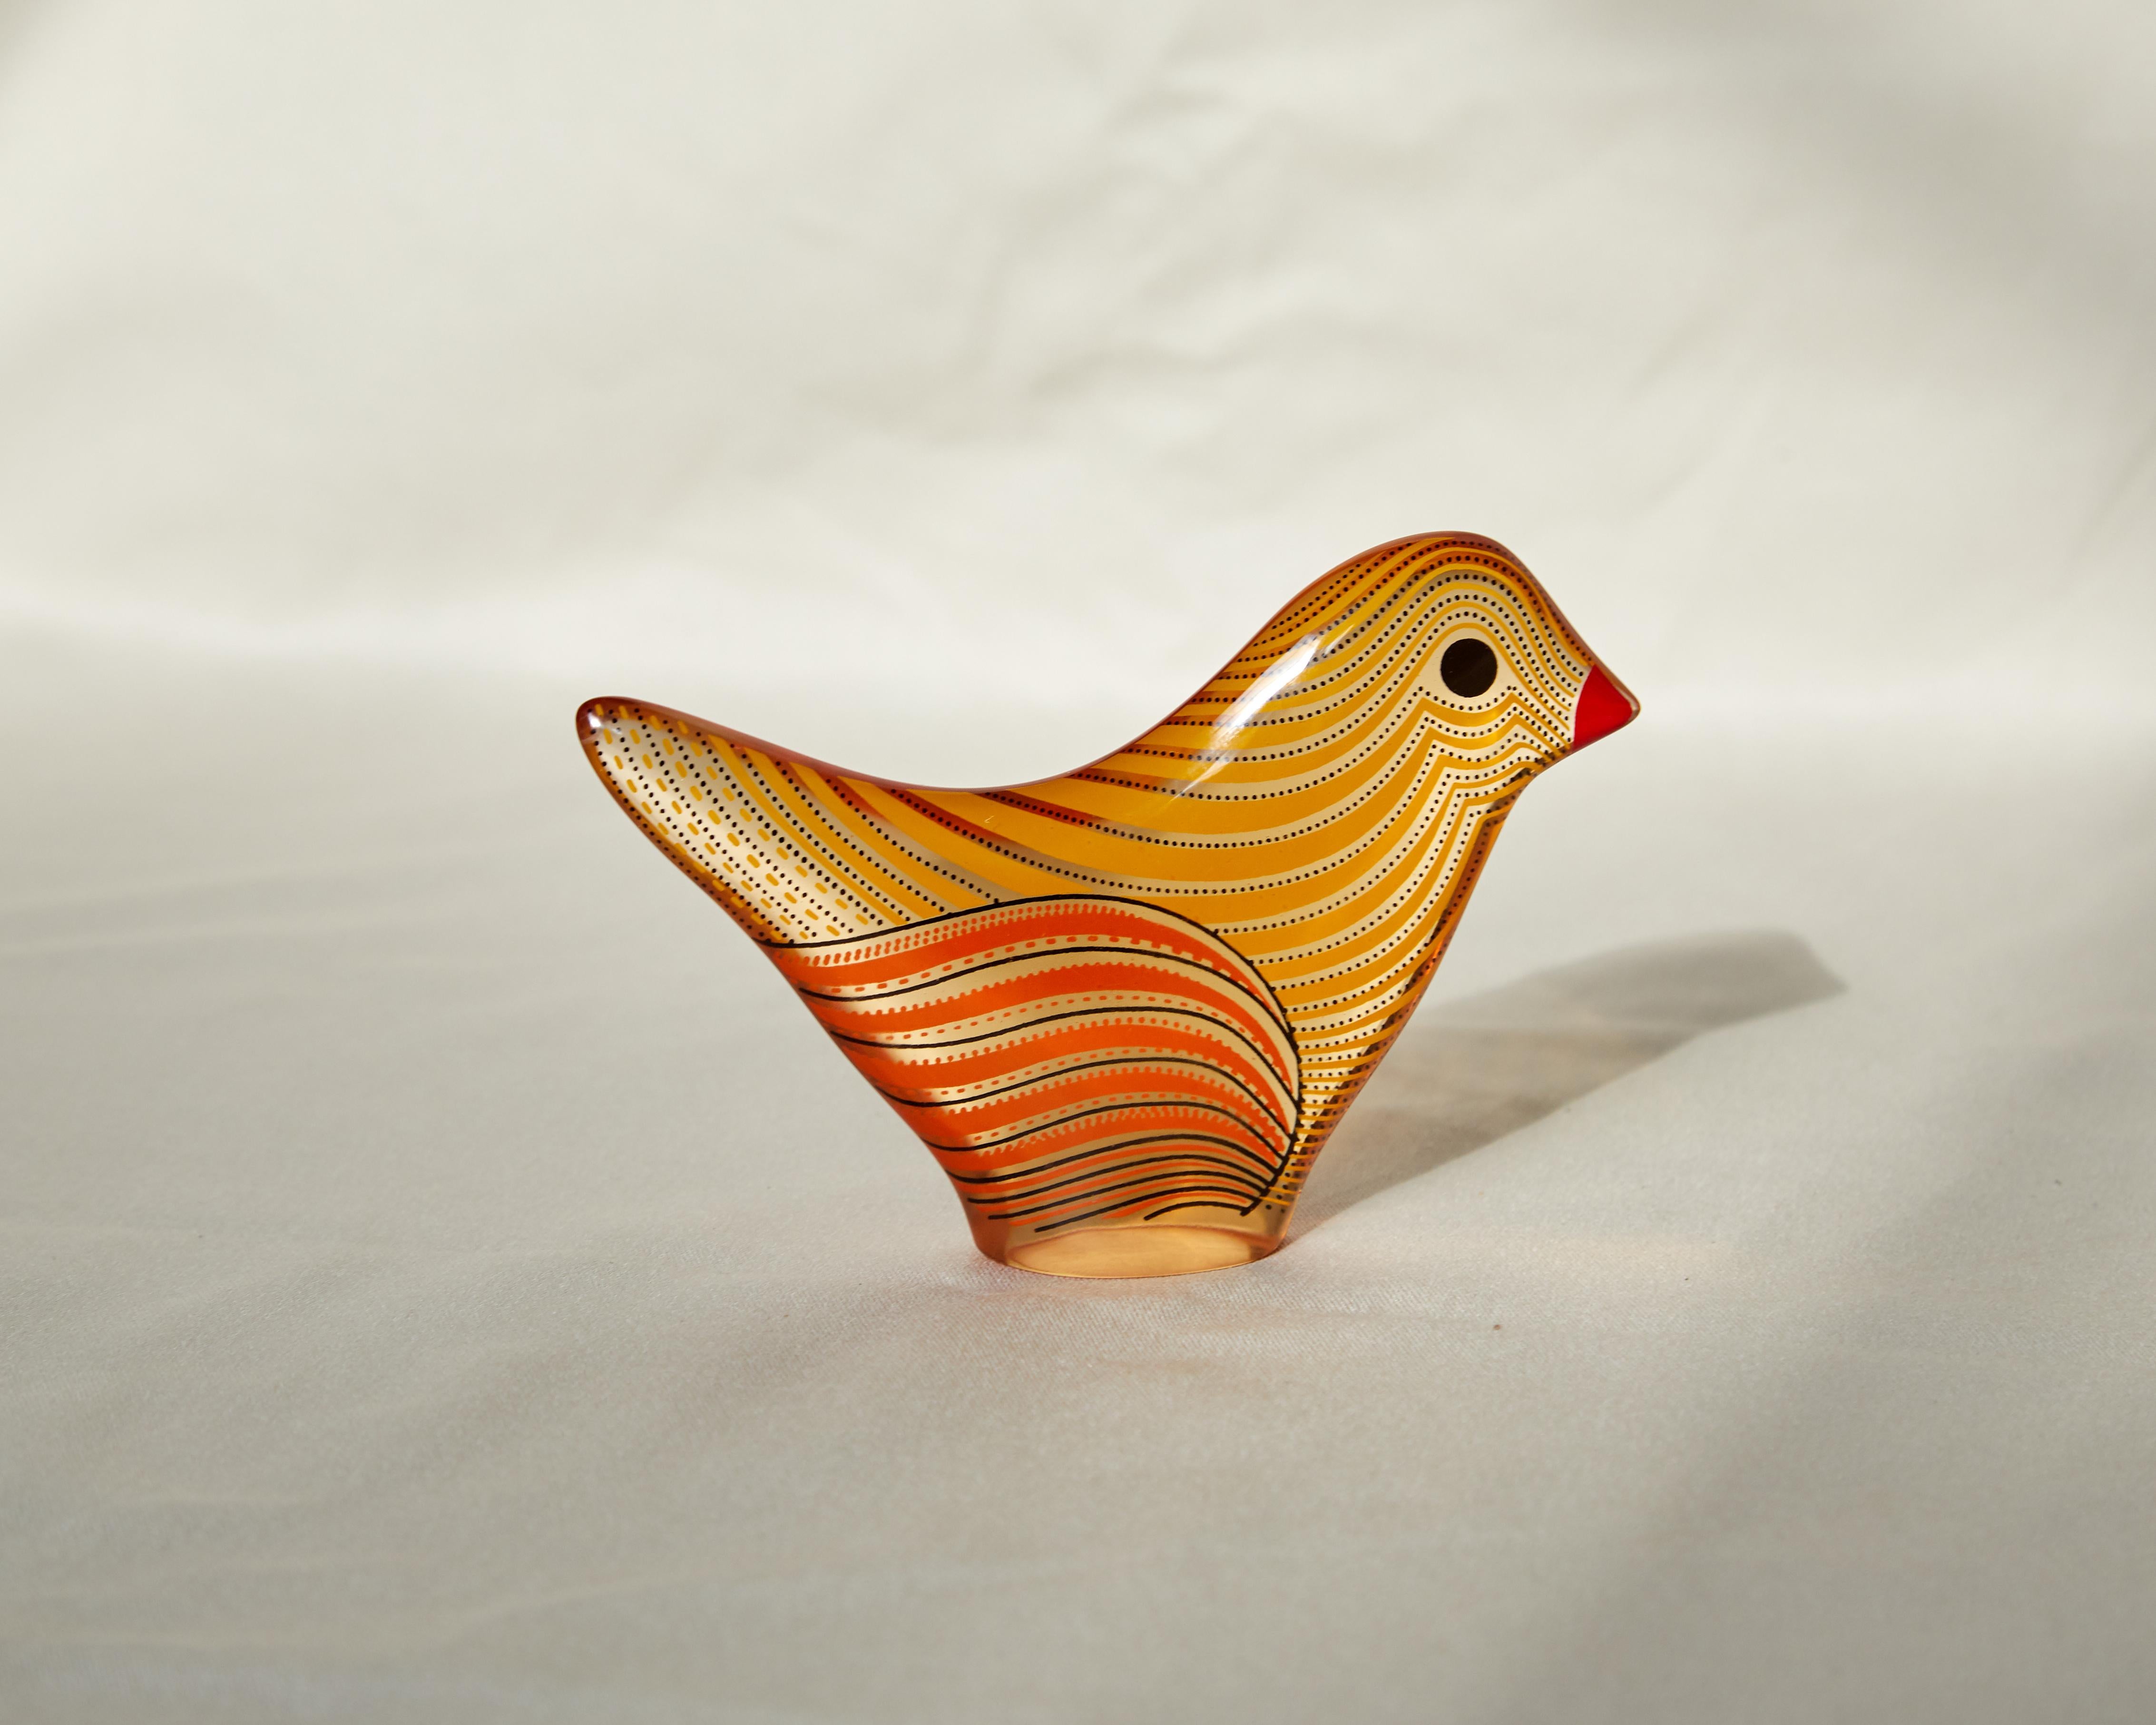 Brazilian mid-century lucite sculpture in the shape of a bird designed by Abraham Palatnik and manufactured by Silon in Rio de Janeiro, that produced large-scale design objects from the 1970s to the 2000s. 

Abraham Palatnik (1928-2020) was a